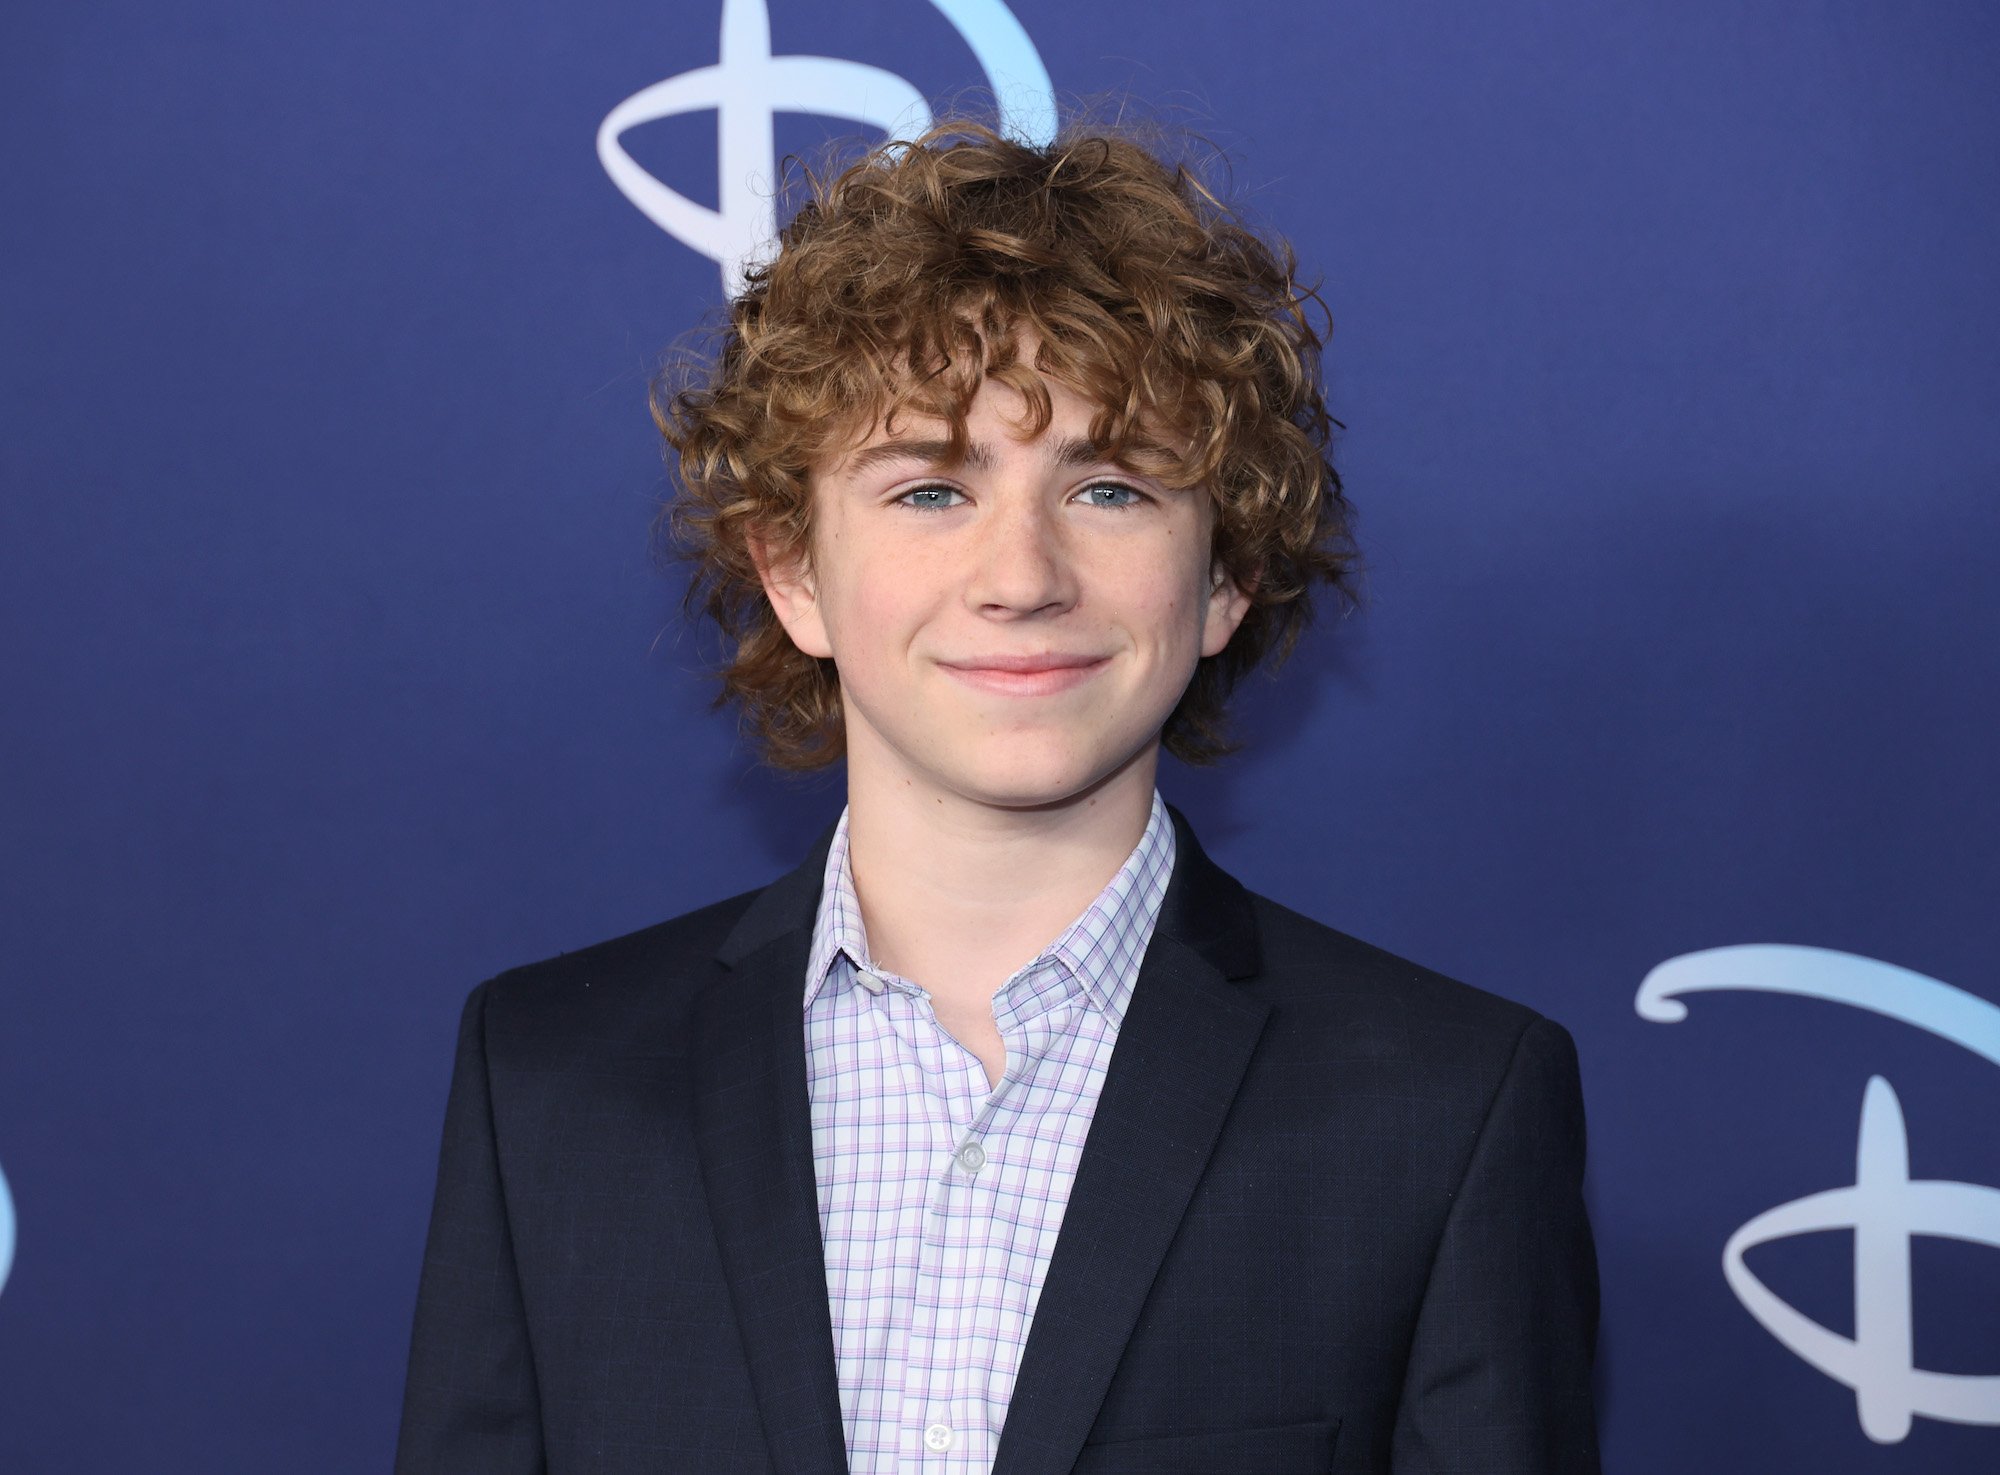 'Percy Jackson and the Olympians' Disney+ series star Walker Scobell smiles at Disney Upfronts